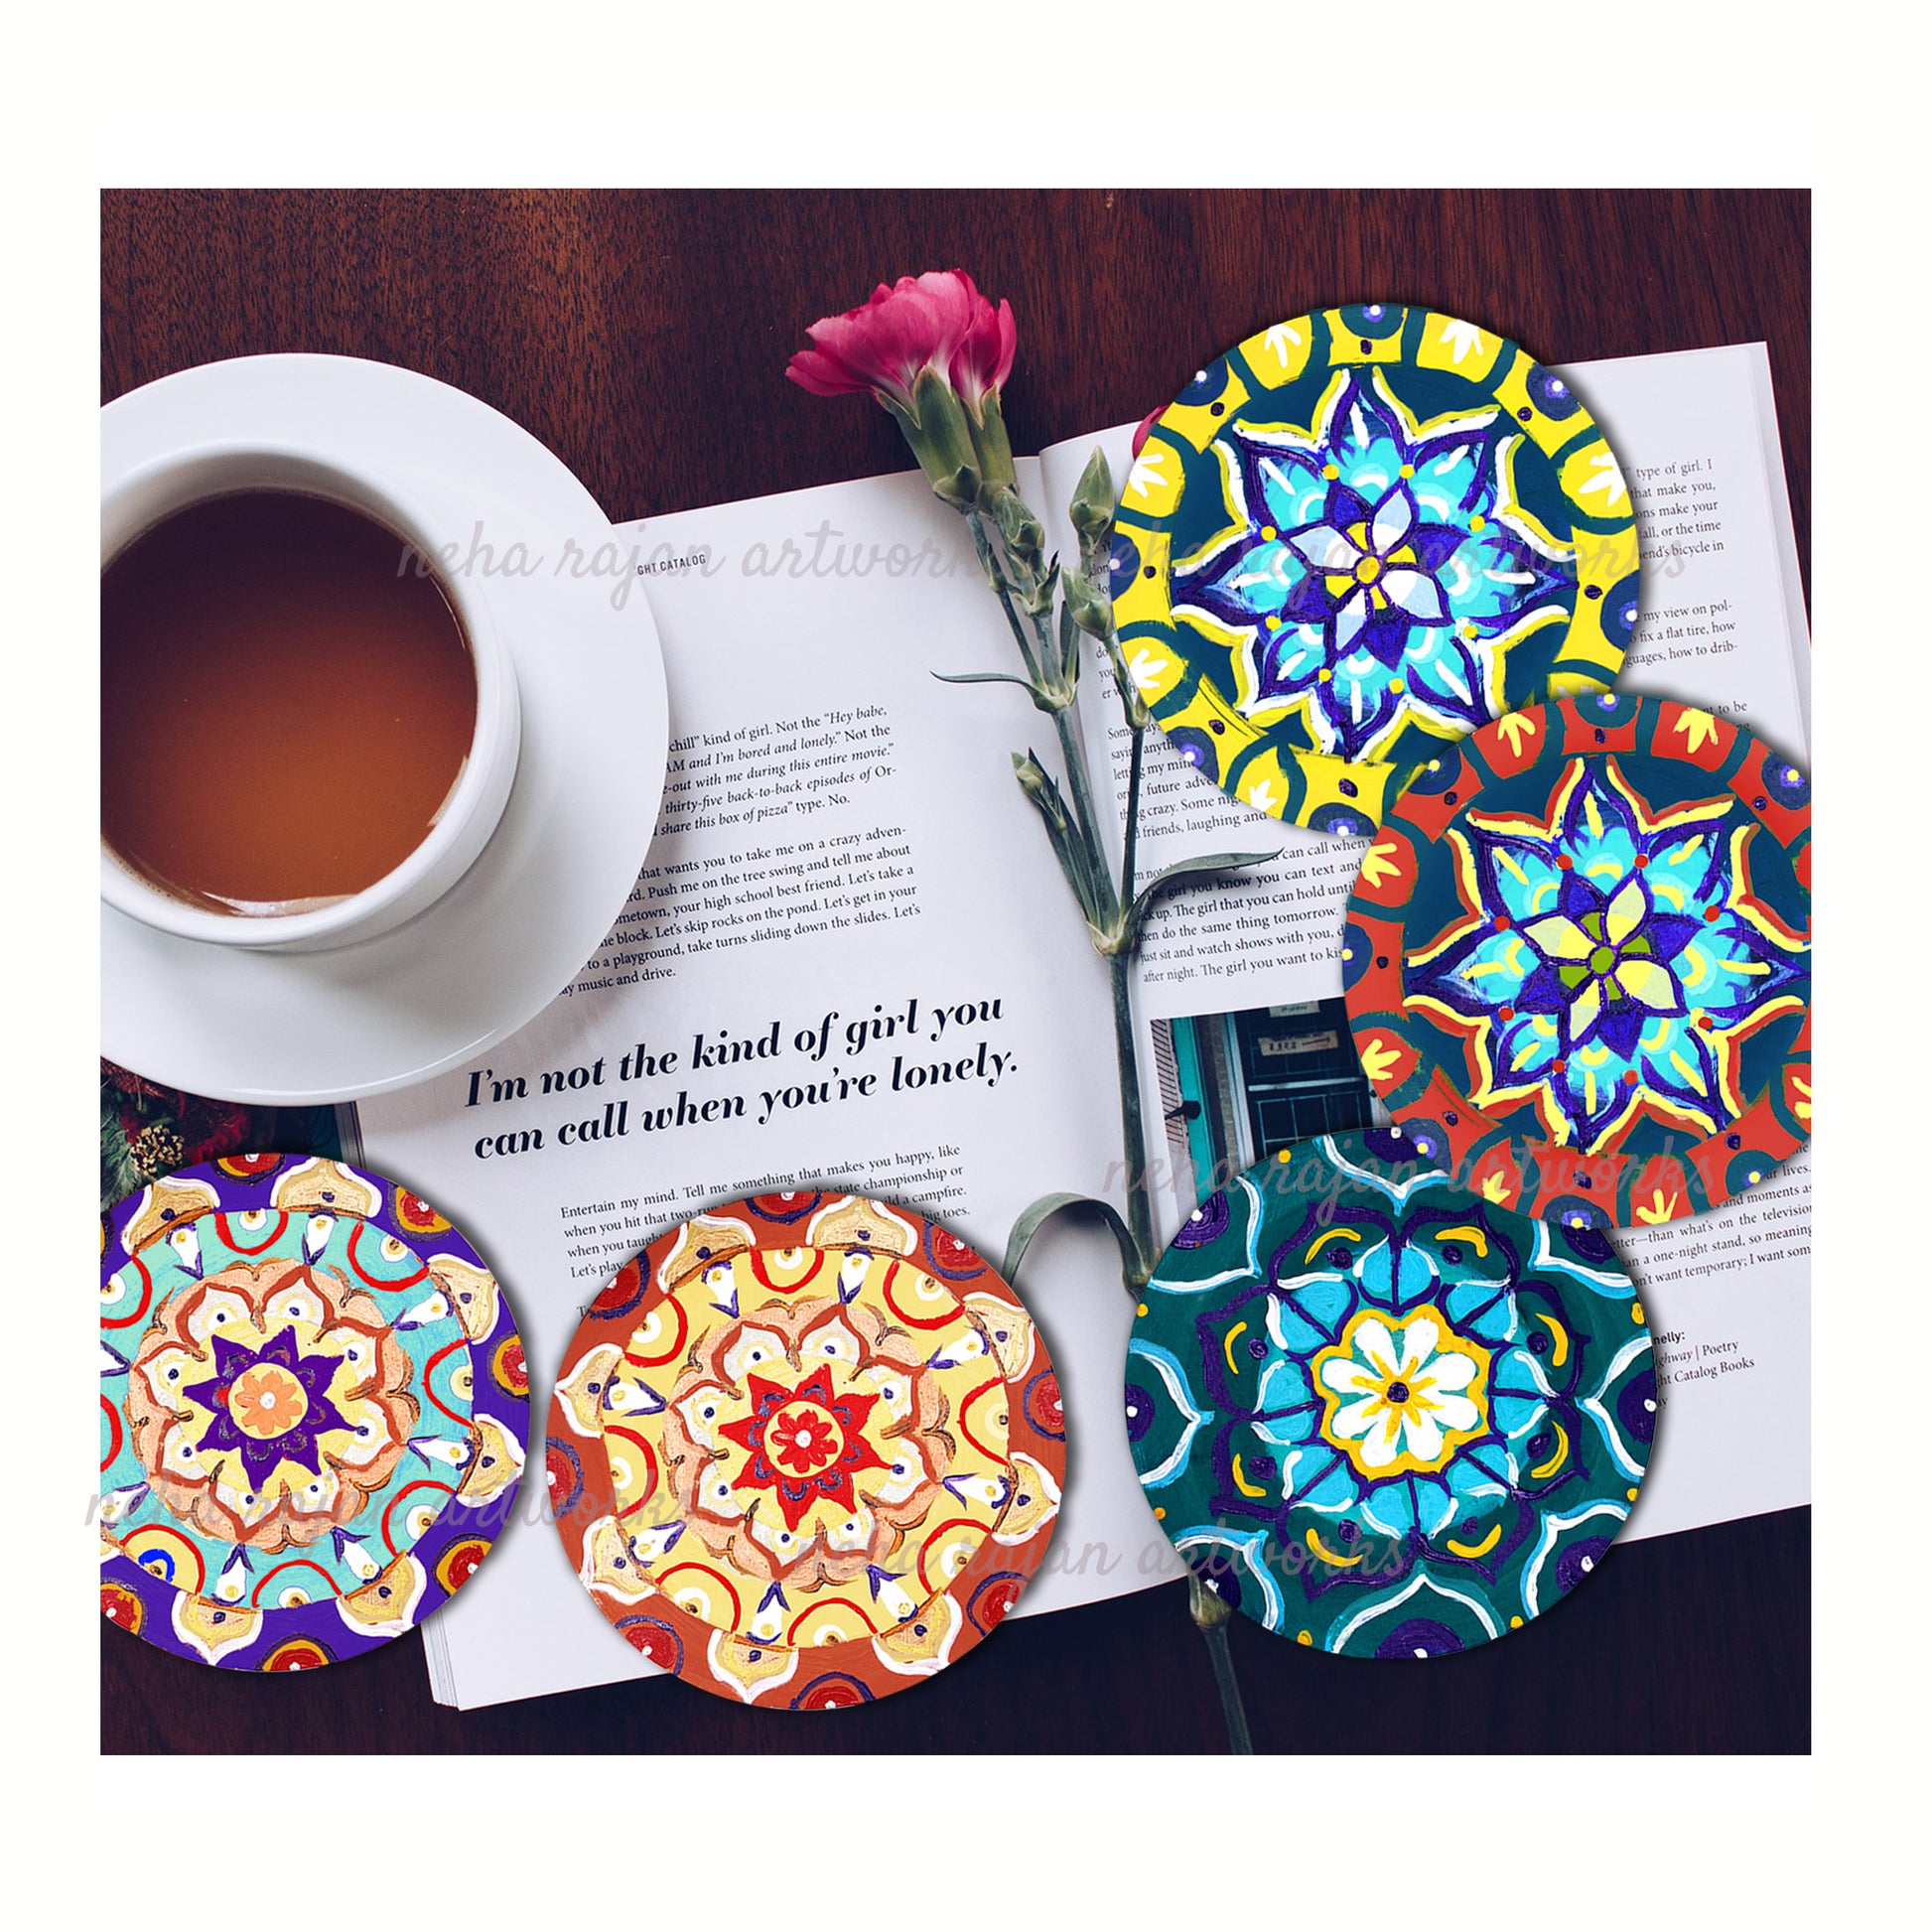 Neha Rajan Artworks Original Wooden Round Coffee/ Tea Coasters Set- Handcrafted & Hand-Painted Floral Mandala Coaster with Easel for Kitchen/Table & Home Decor/Gifts/Restaurants/Living Room/Coffee Table (Set of 4)